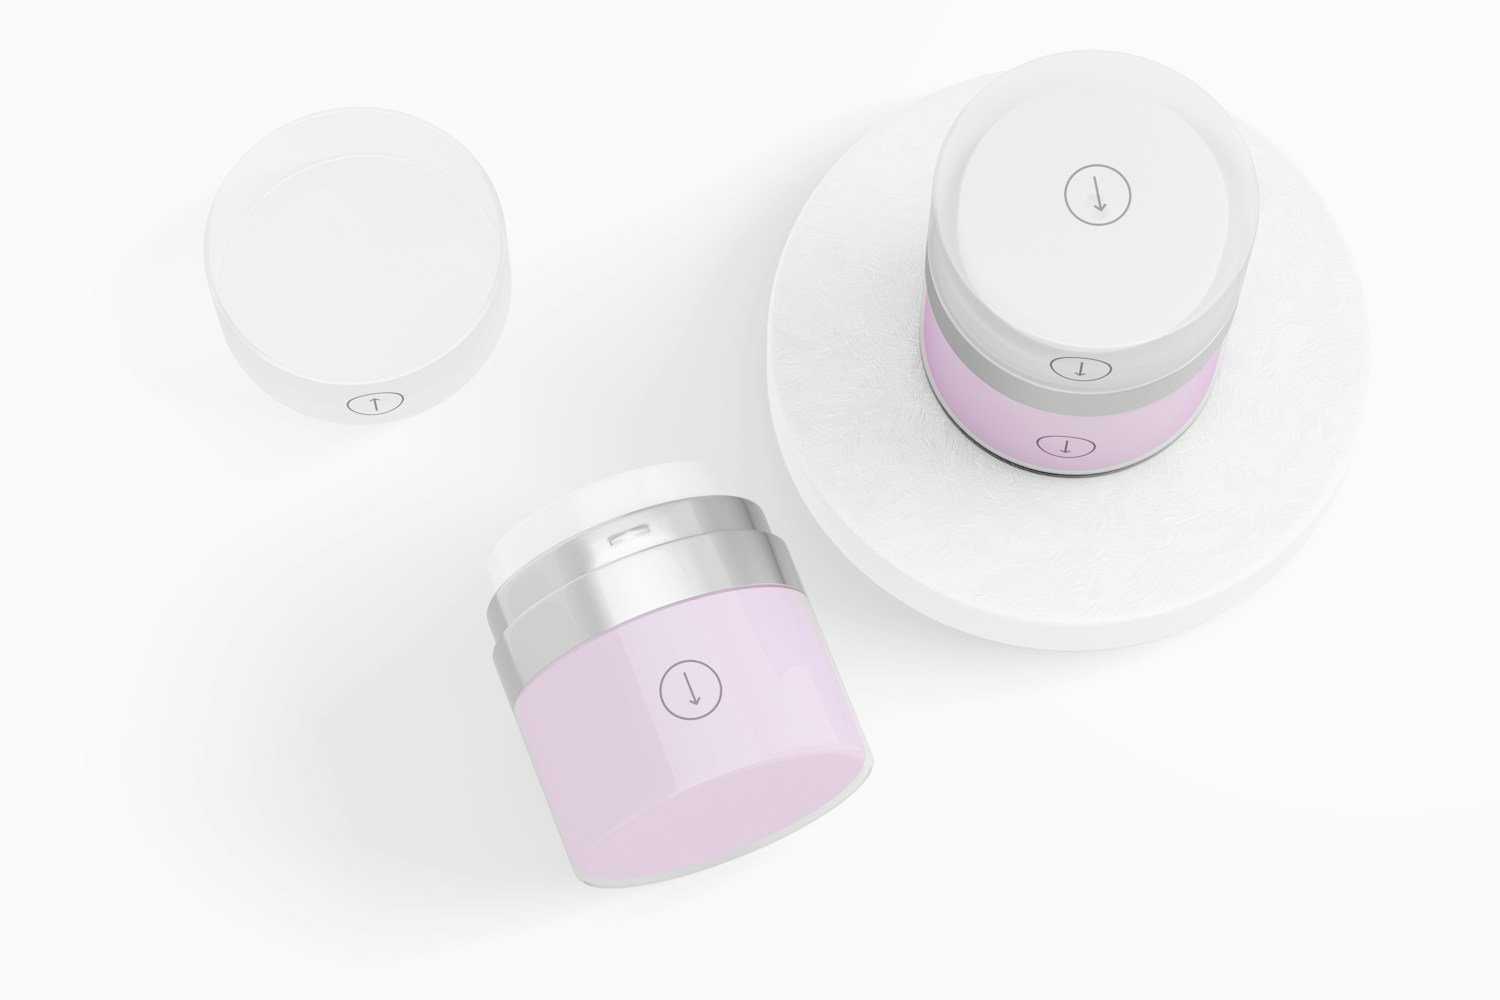 Airless Jar Mockup, Standing and Dropped